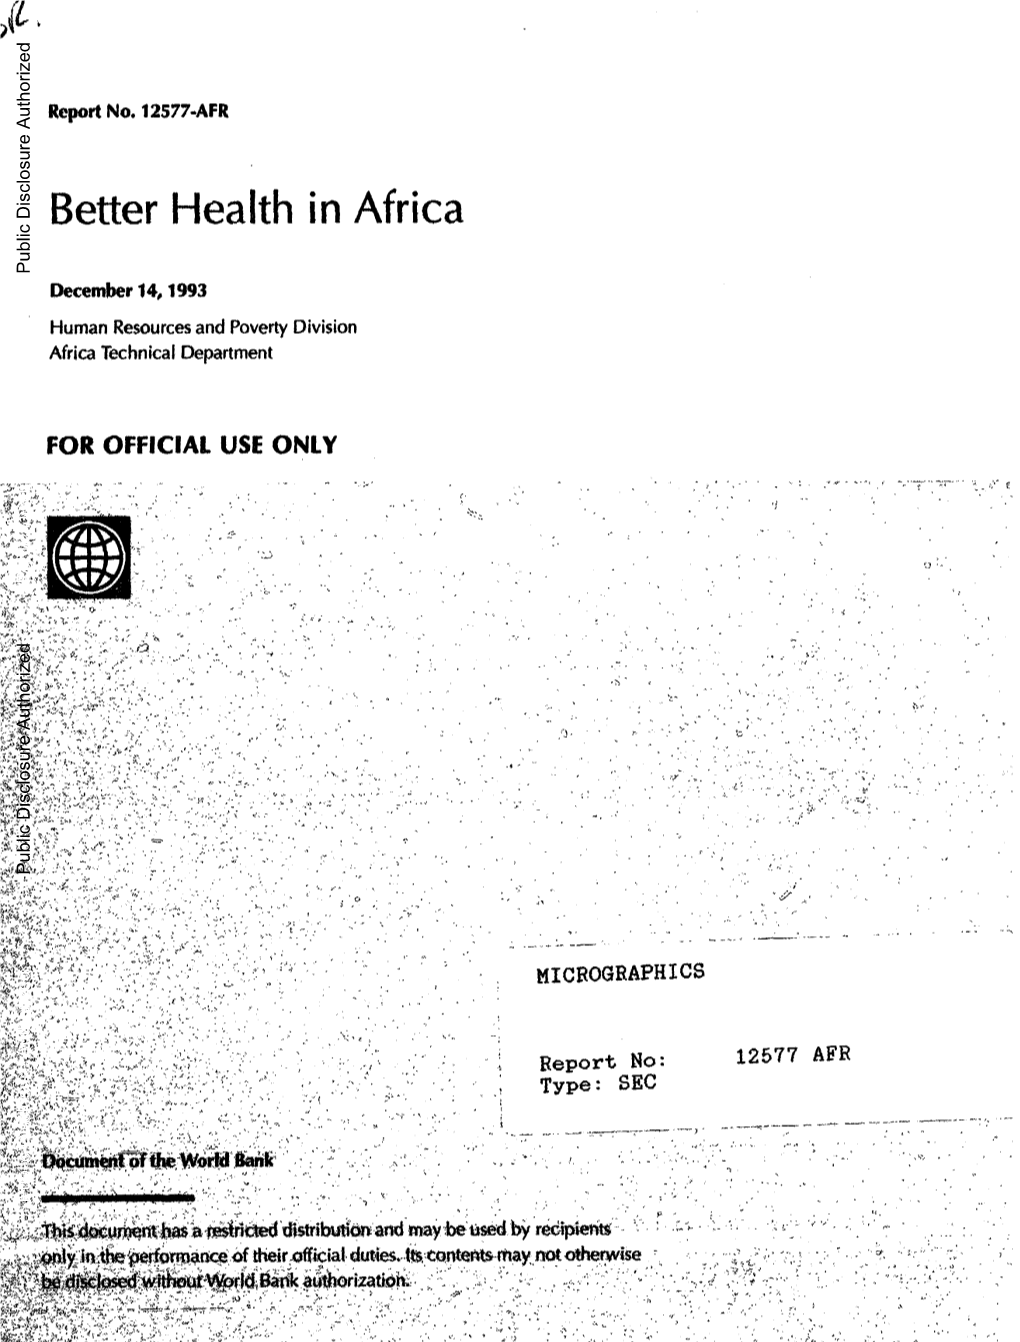 Health in Africa Public Disclosure Authorized Dlecember14, 1993 Humanresources and Poverty Division Africatechnical Department